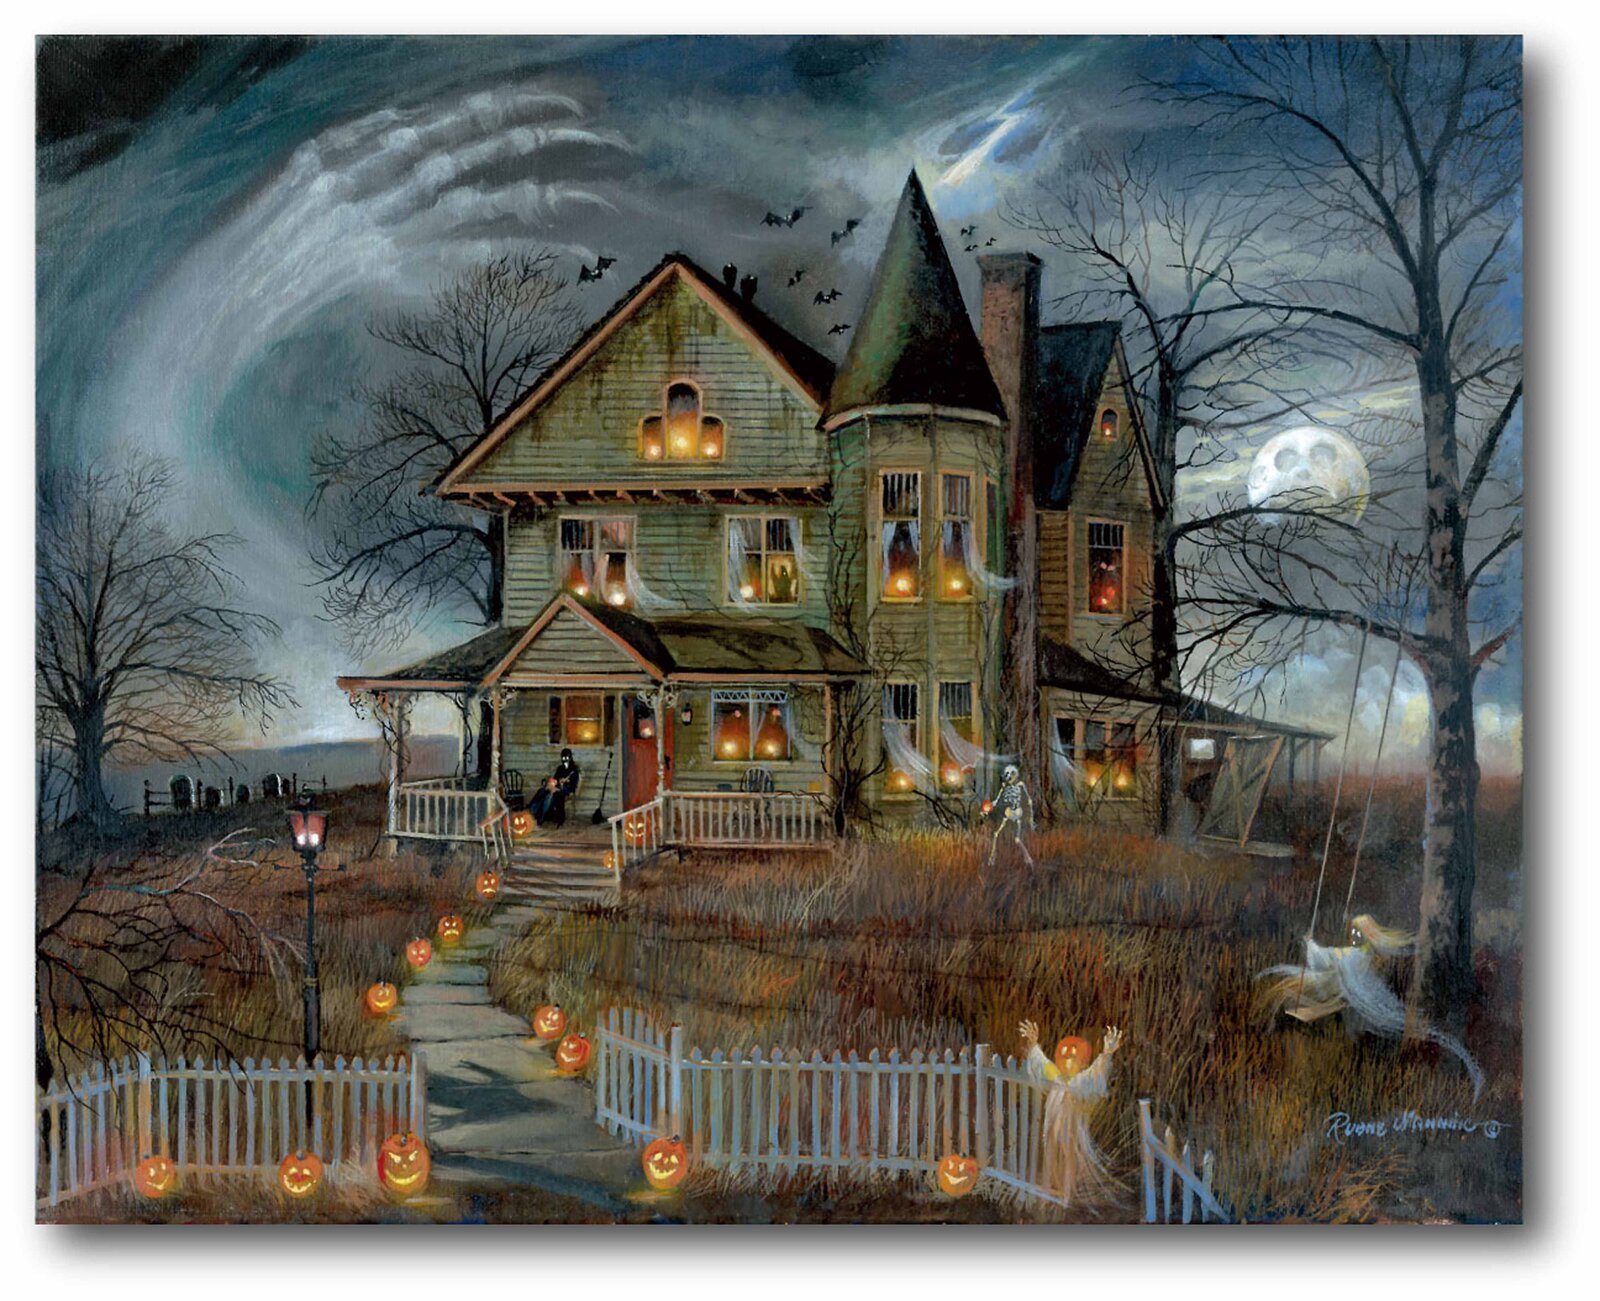 Scary Halloween Decor - 'Haunted House' Graphic Art Print on Canvas